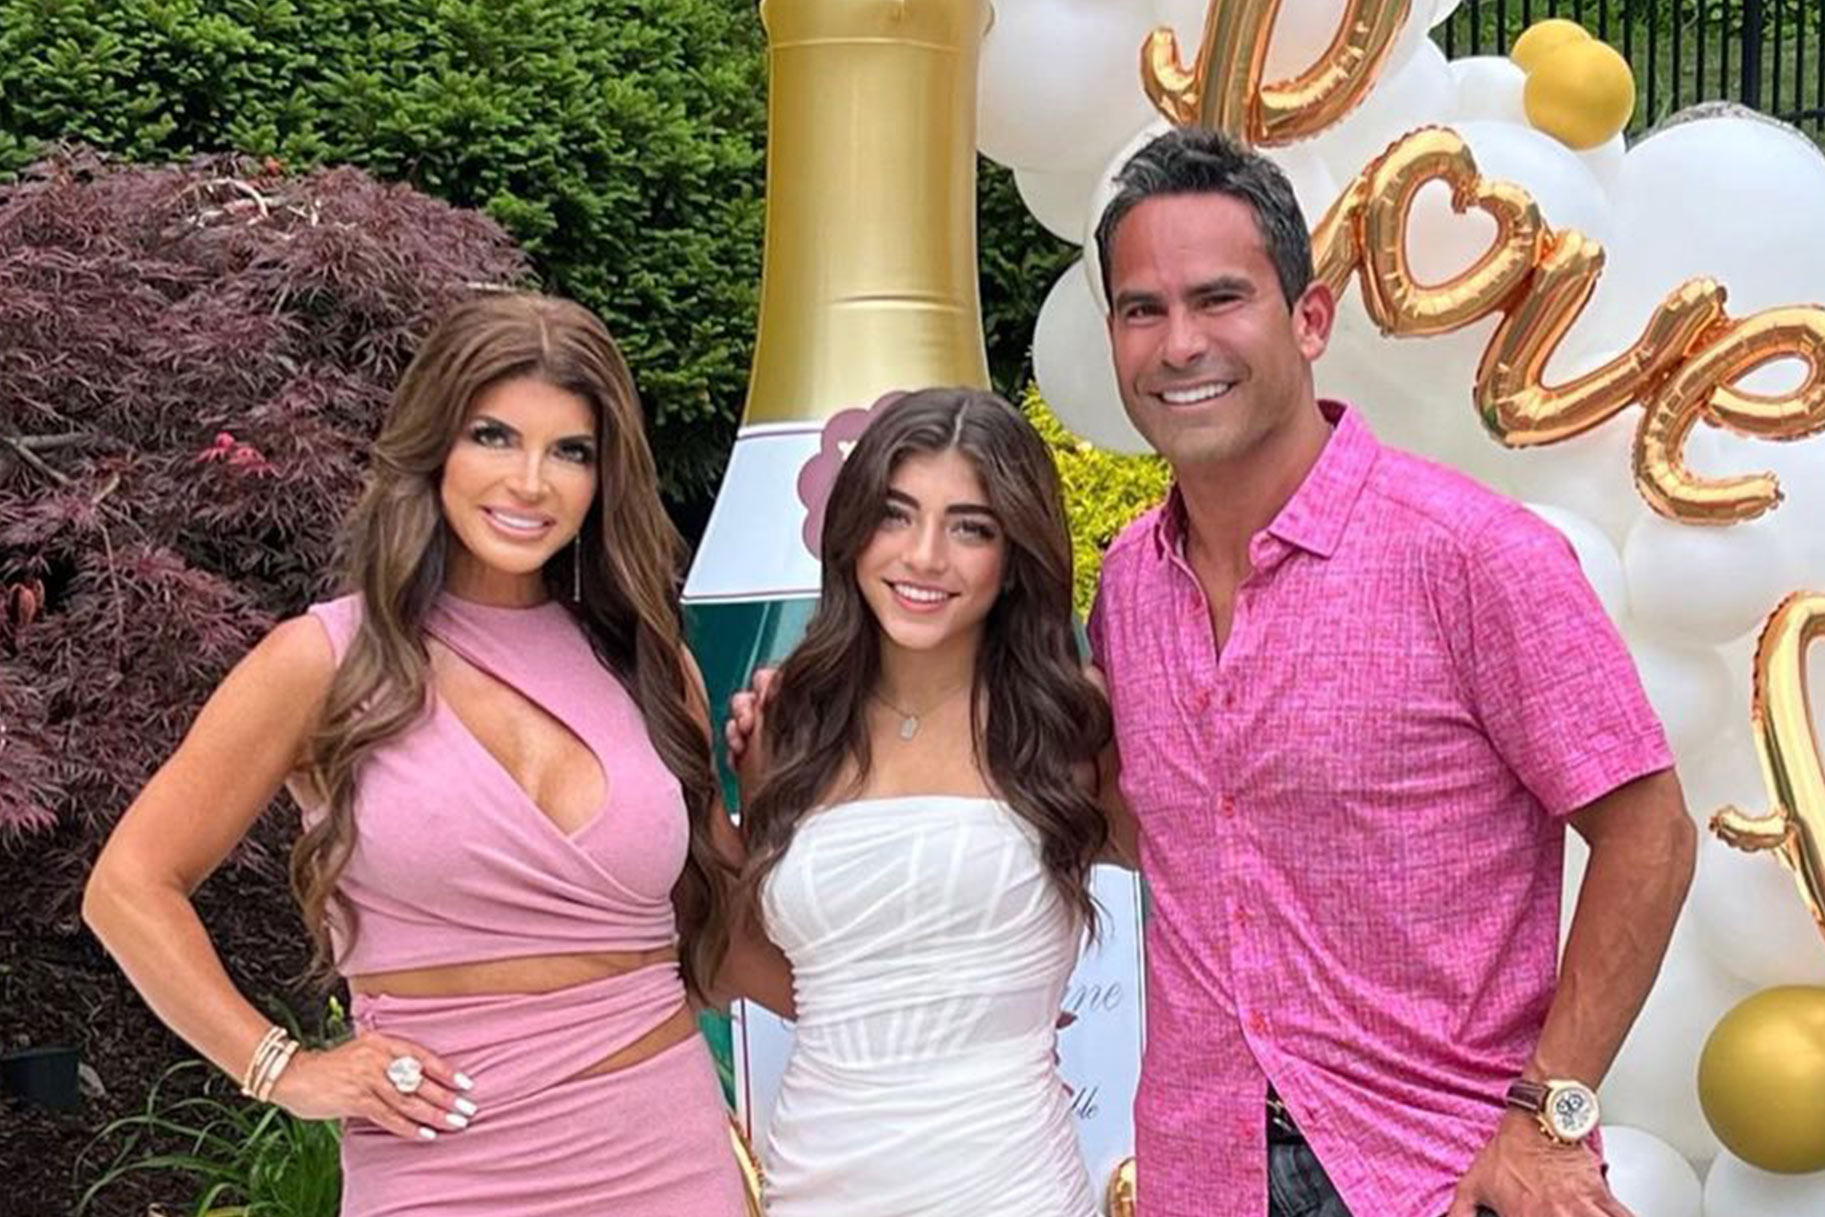 Milania Giudice, Teresa Giudice, and Louie Ruelas of the Real Housewives of New Jersey.